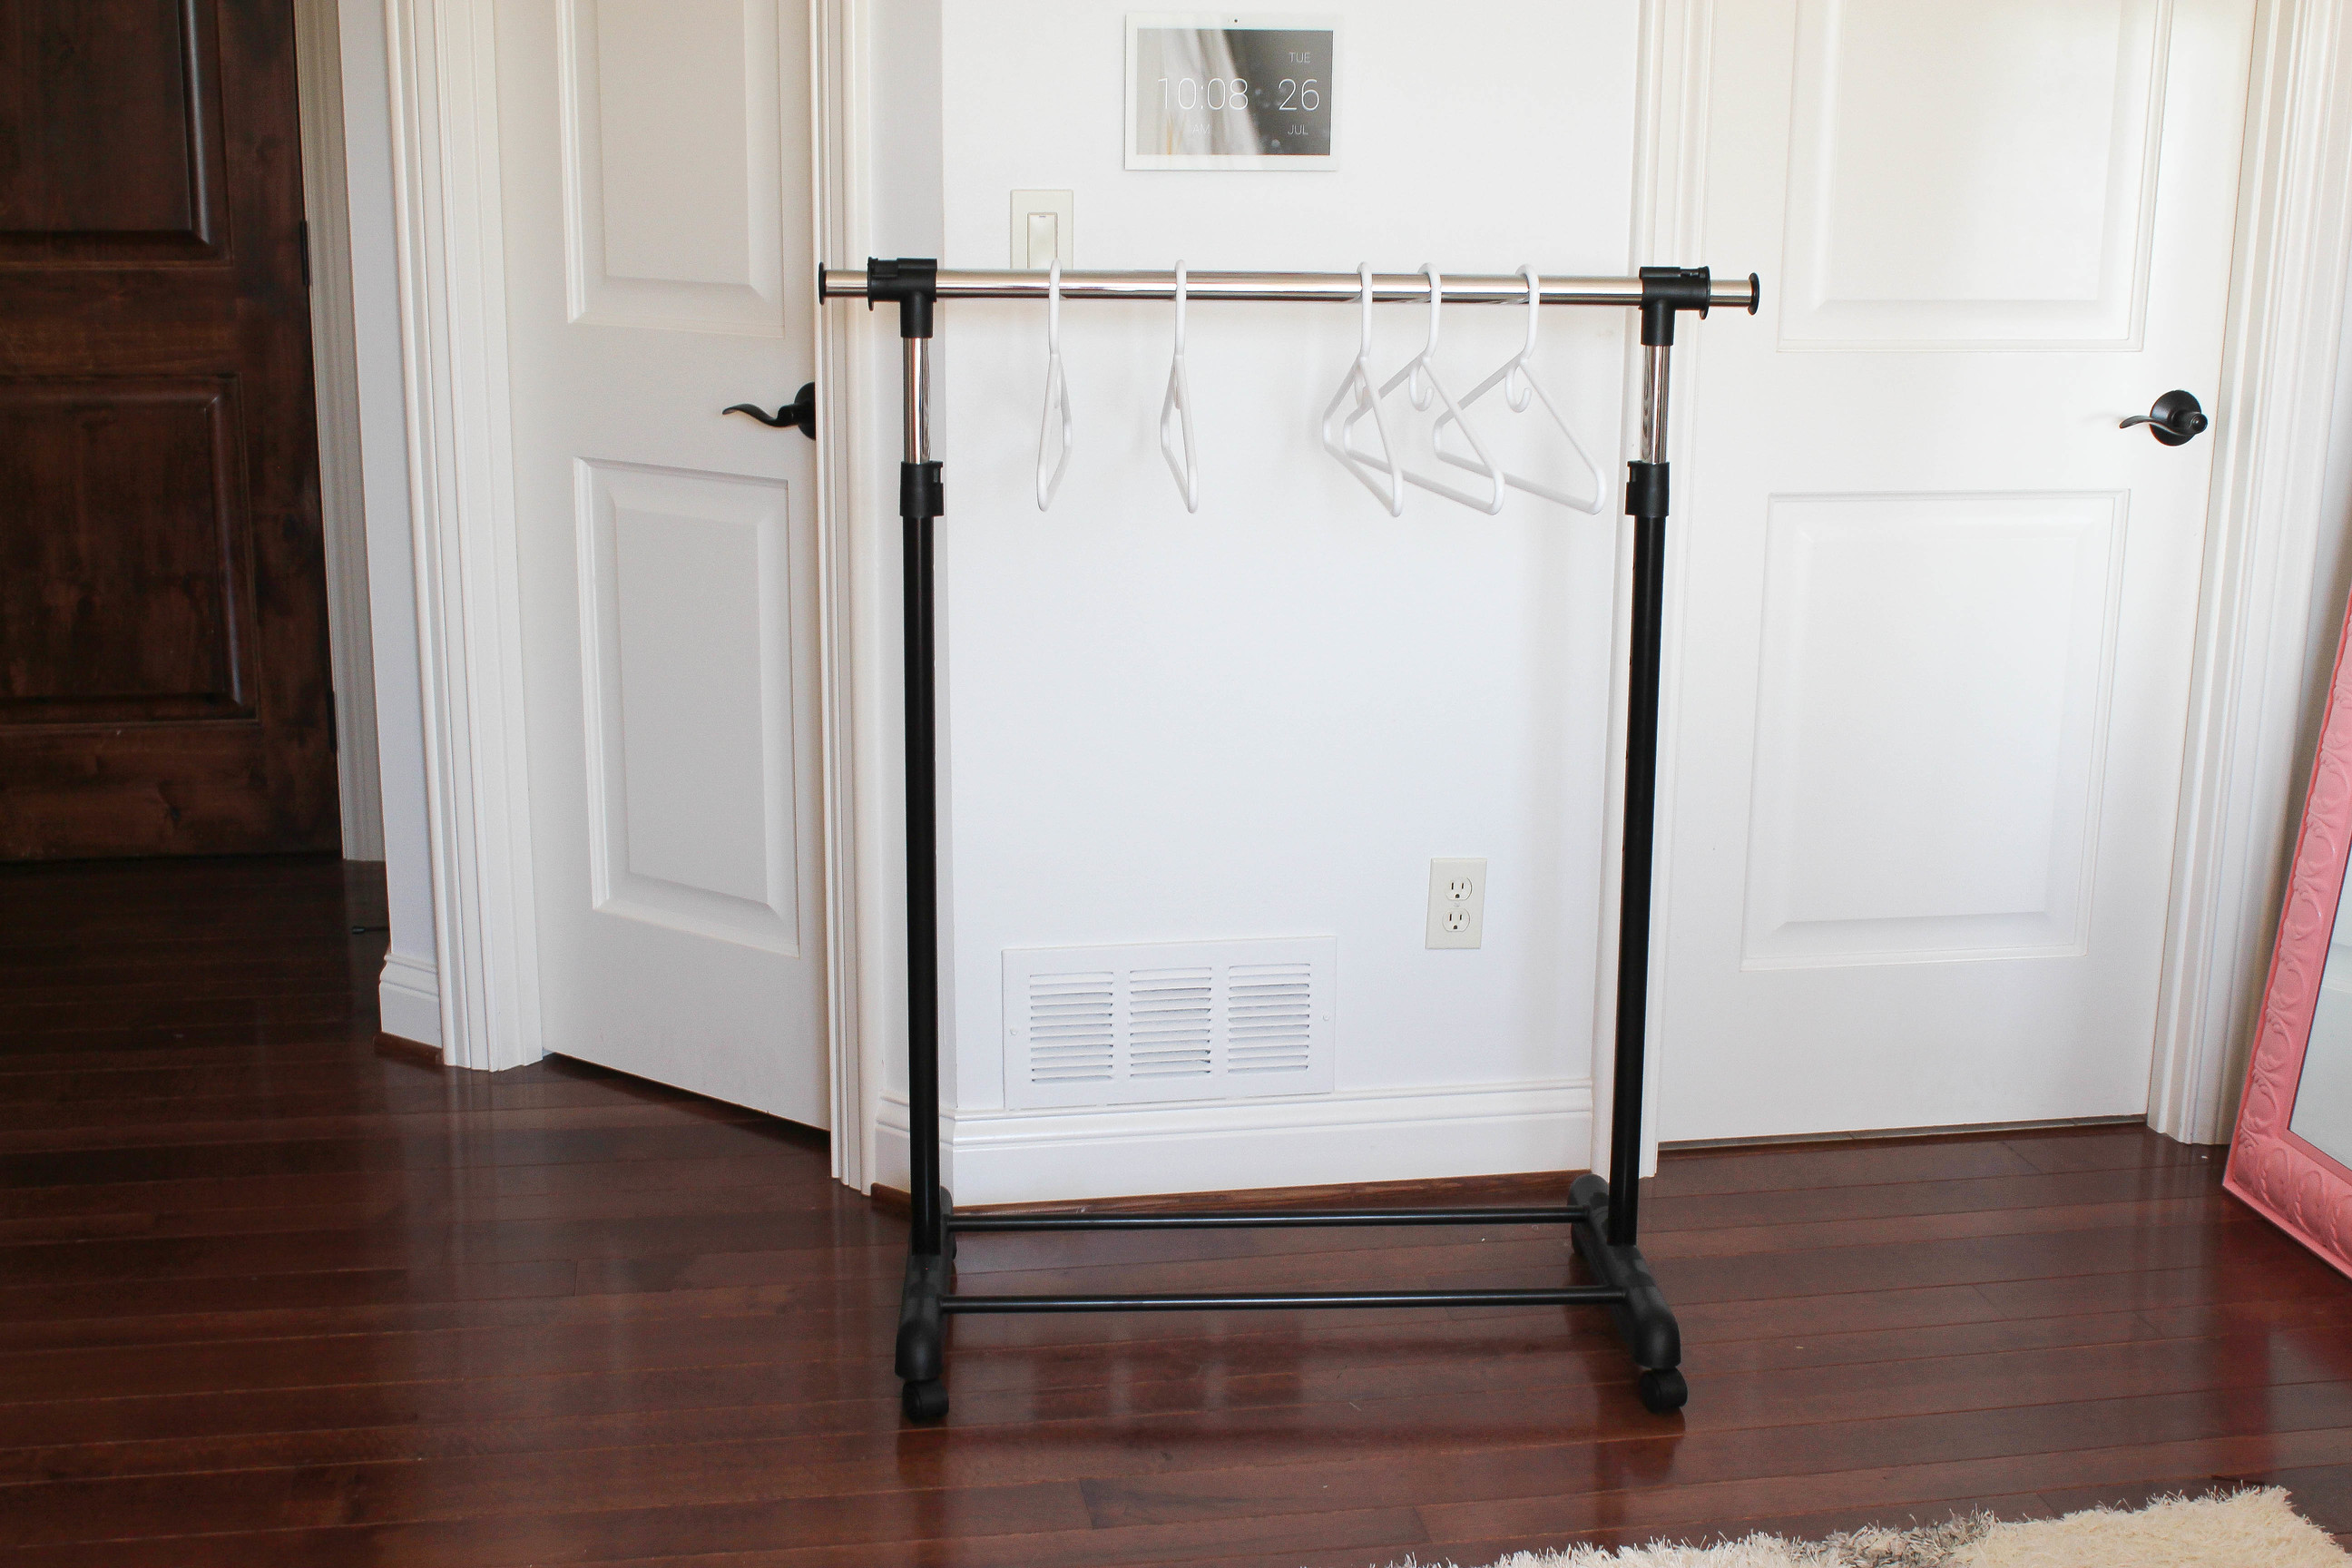 DIY gold clothing rack for UNDER $30 - garment rack - spray painted clothing hanger DIY do it yourself by lauren lindmark on daily dose of charm